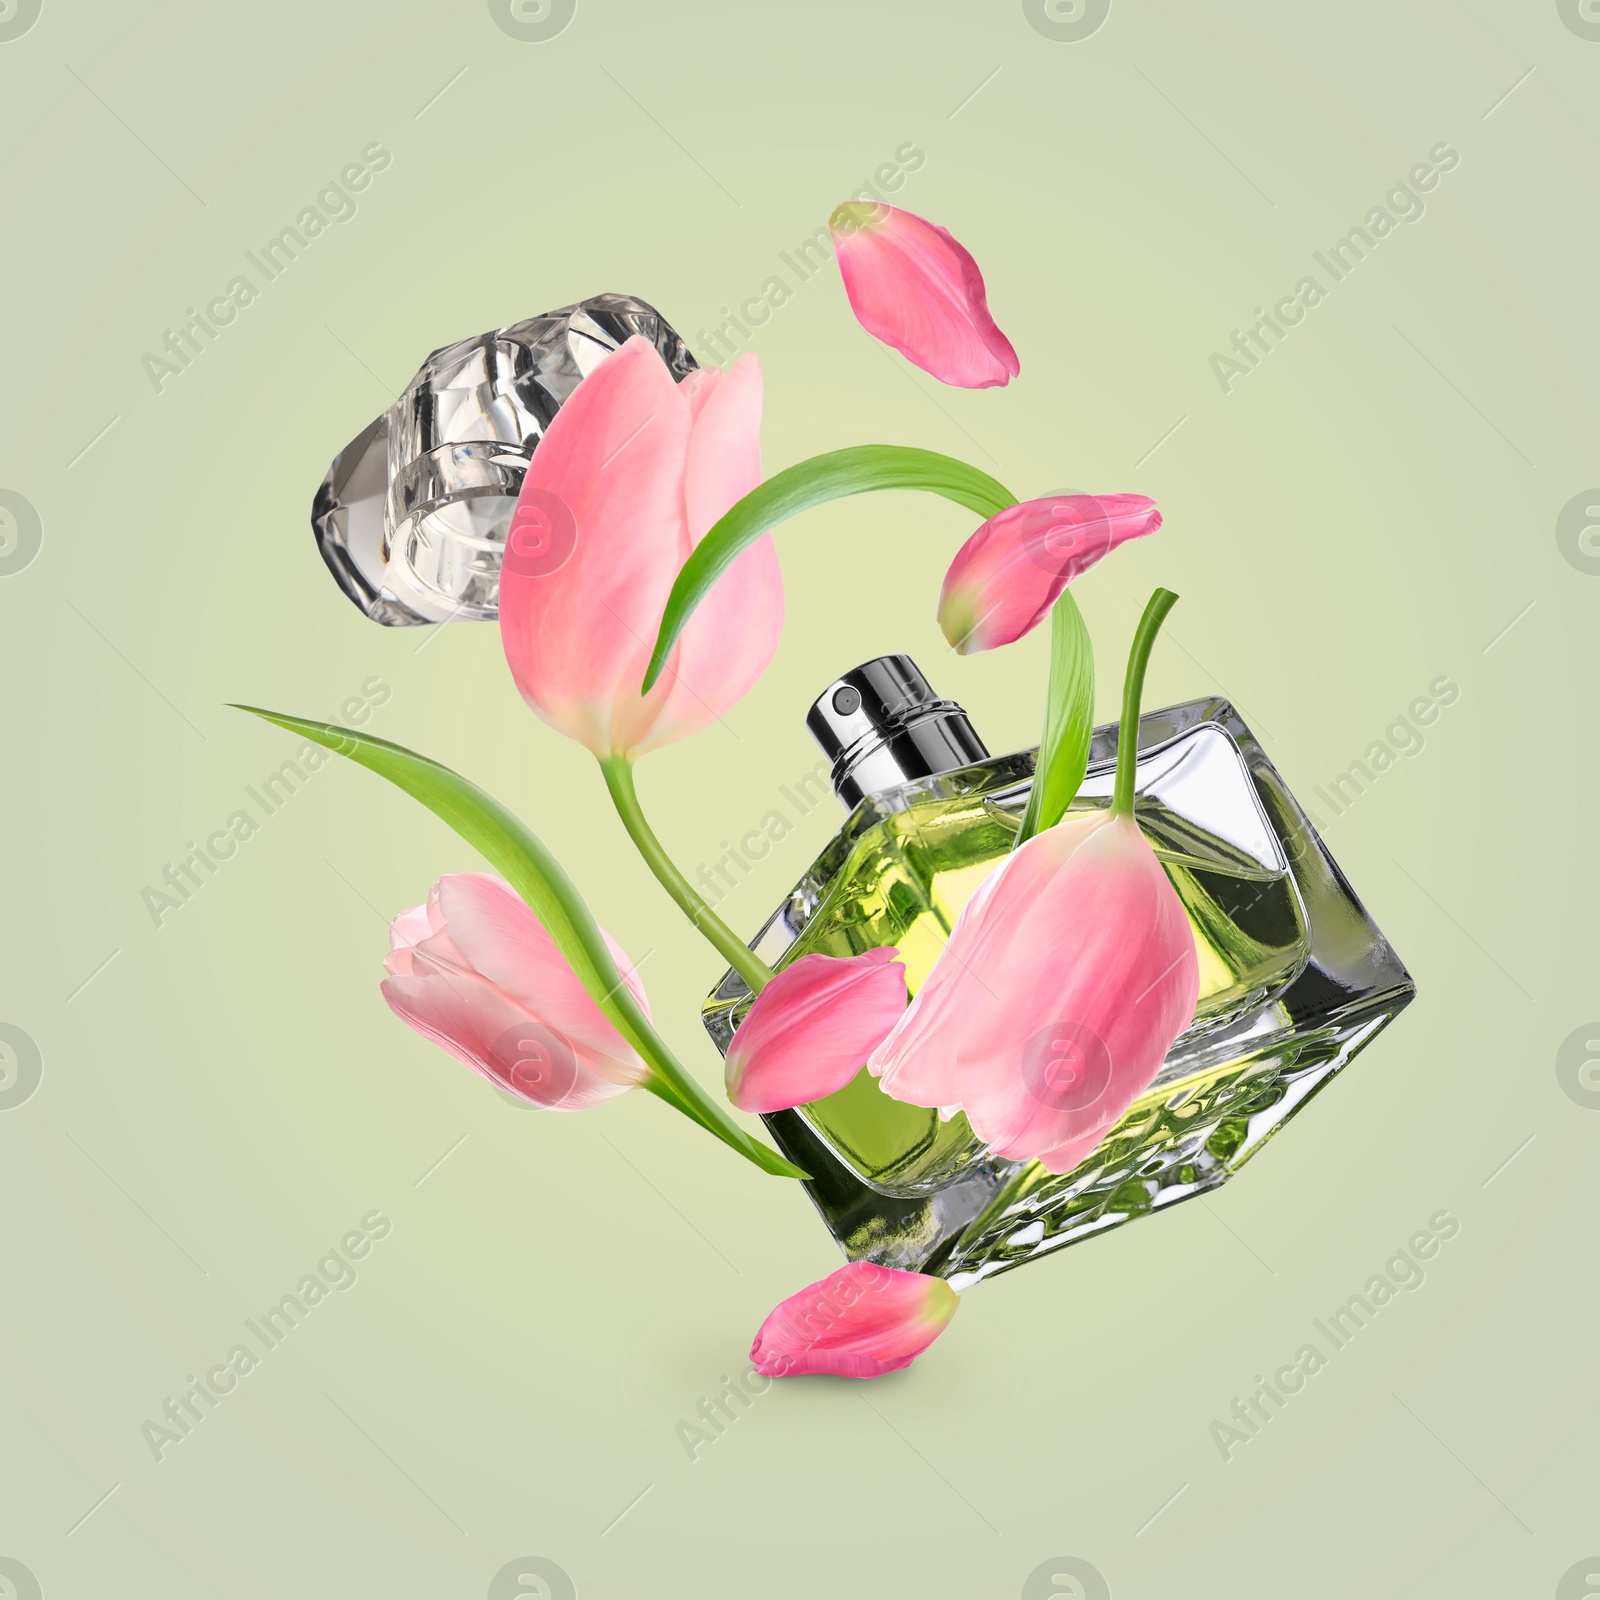 Image of Bottle of perfume and tulips in air on olive background